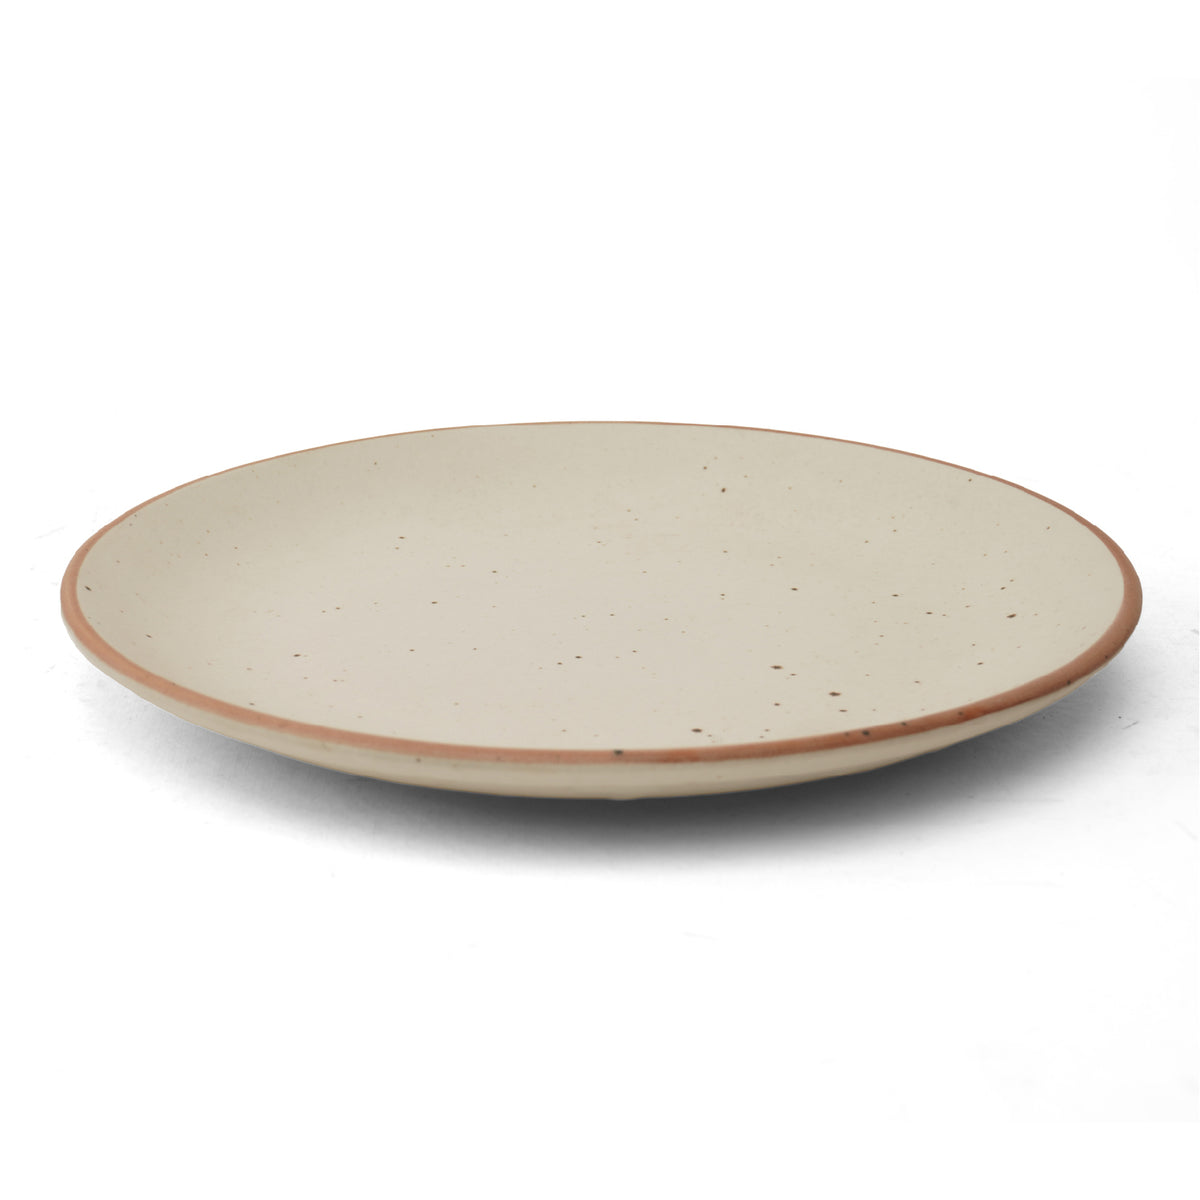 Claymistry Ceramic Quarter Plate Combo | Set of 2 | Biege with brown dots and borders | Ceramic Combos | Dinner Plates | Crockery | Dinnerware